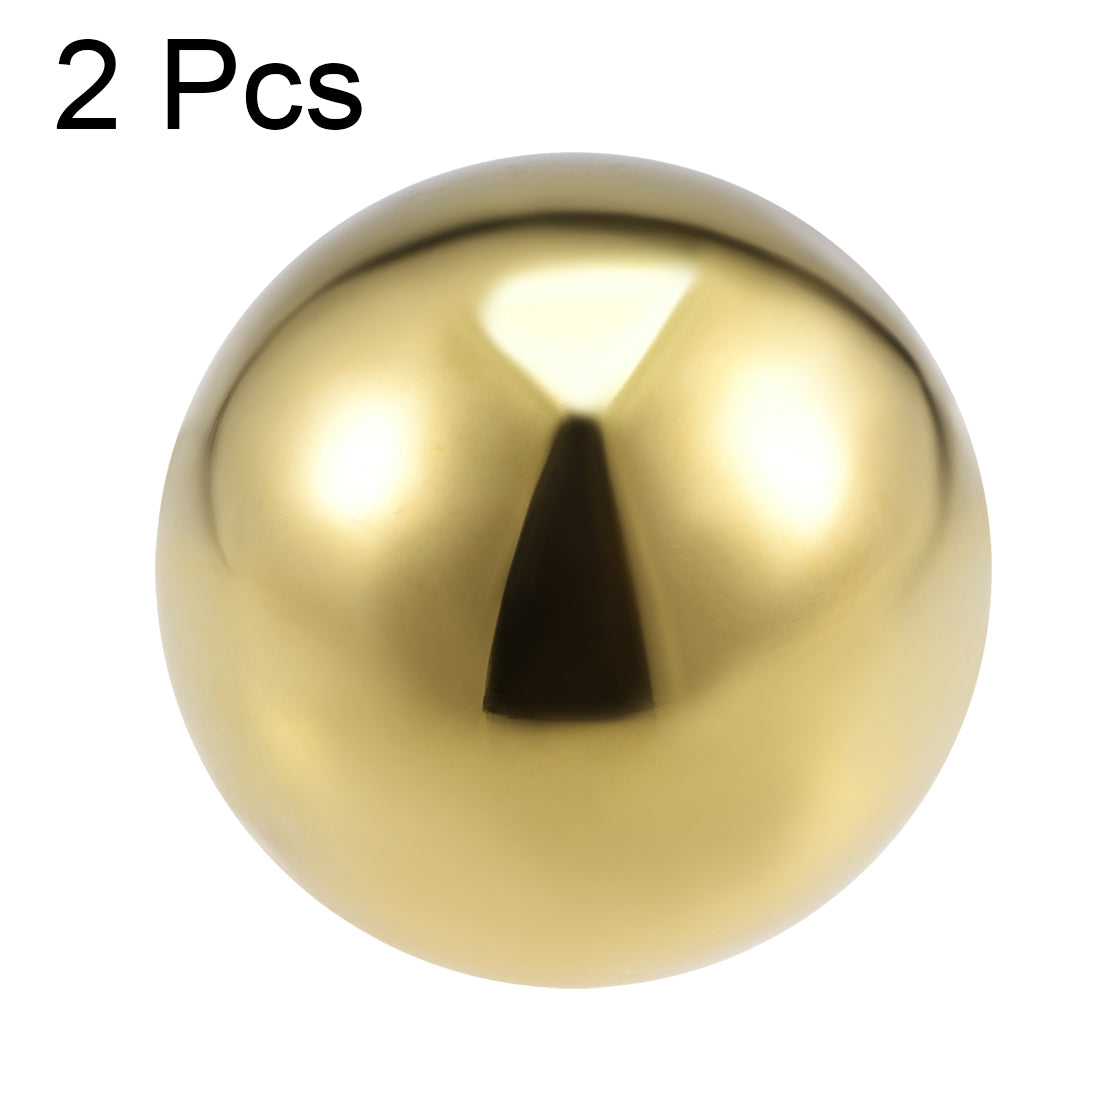 uxcell Uxcell 60mm Dia 201 Stainless Steel Hollow Cap Ball Spheres for Handrail Stair Newel Post Gold Tone 2pcs